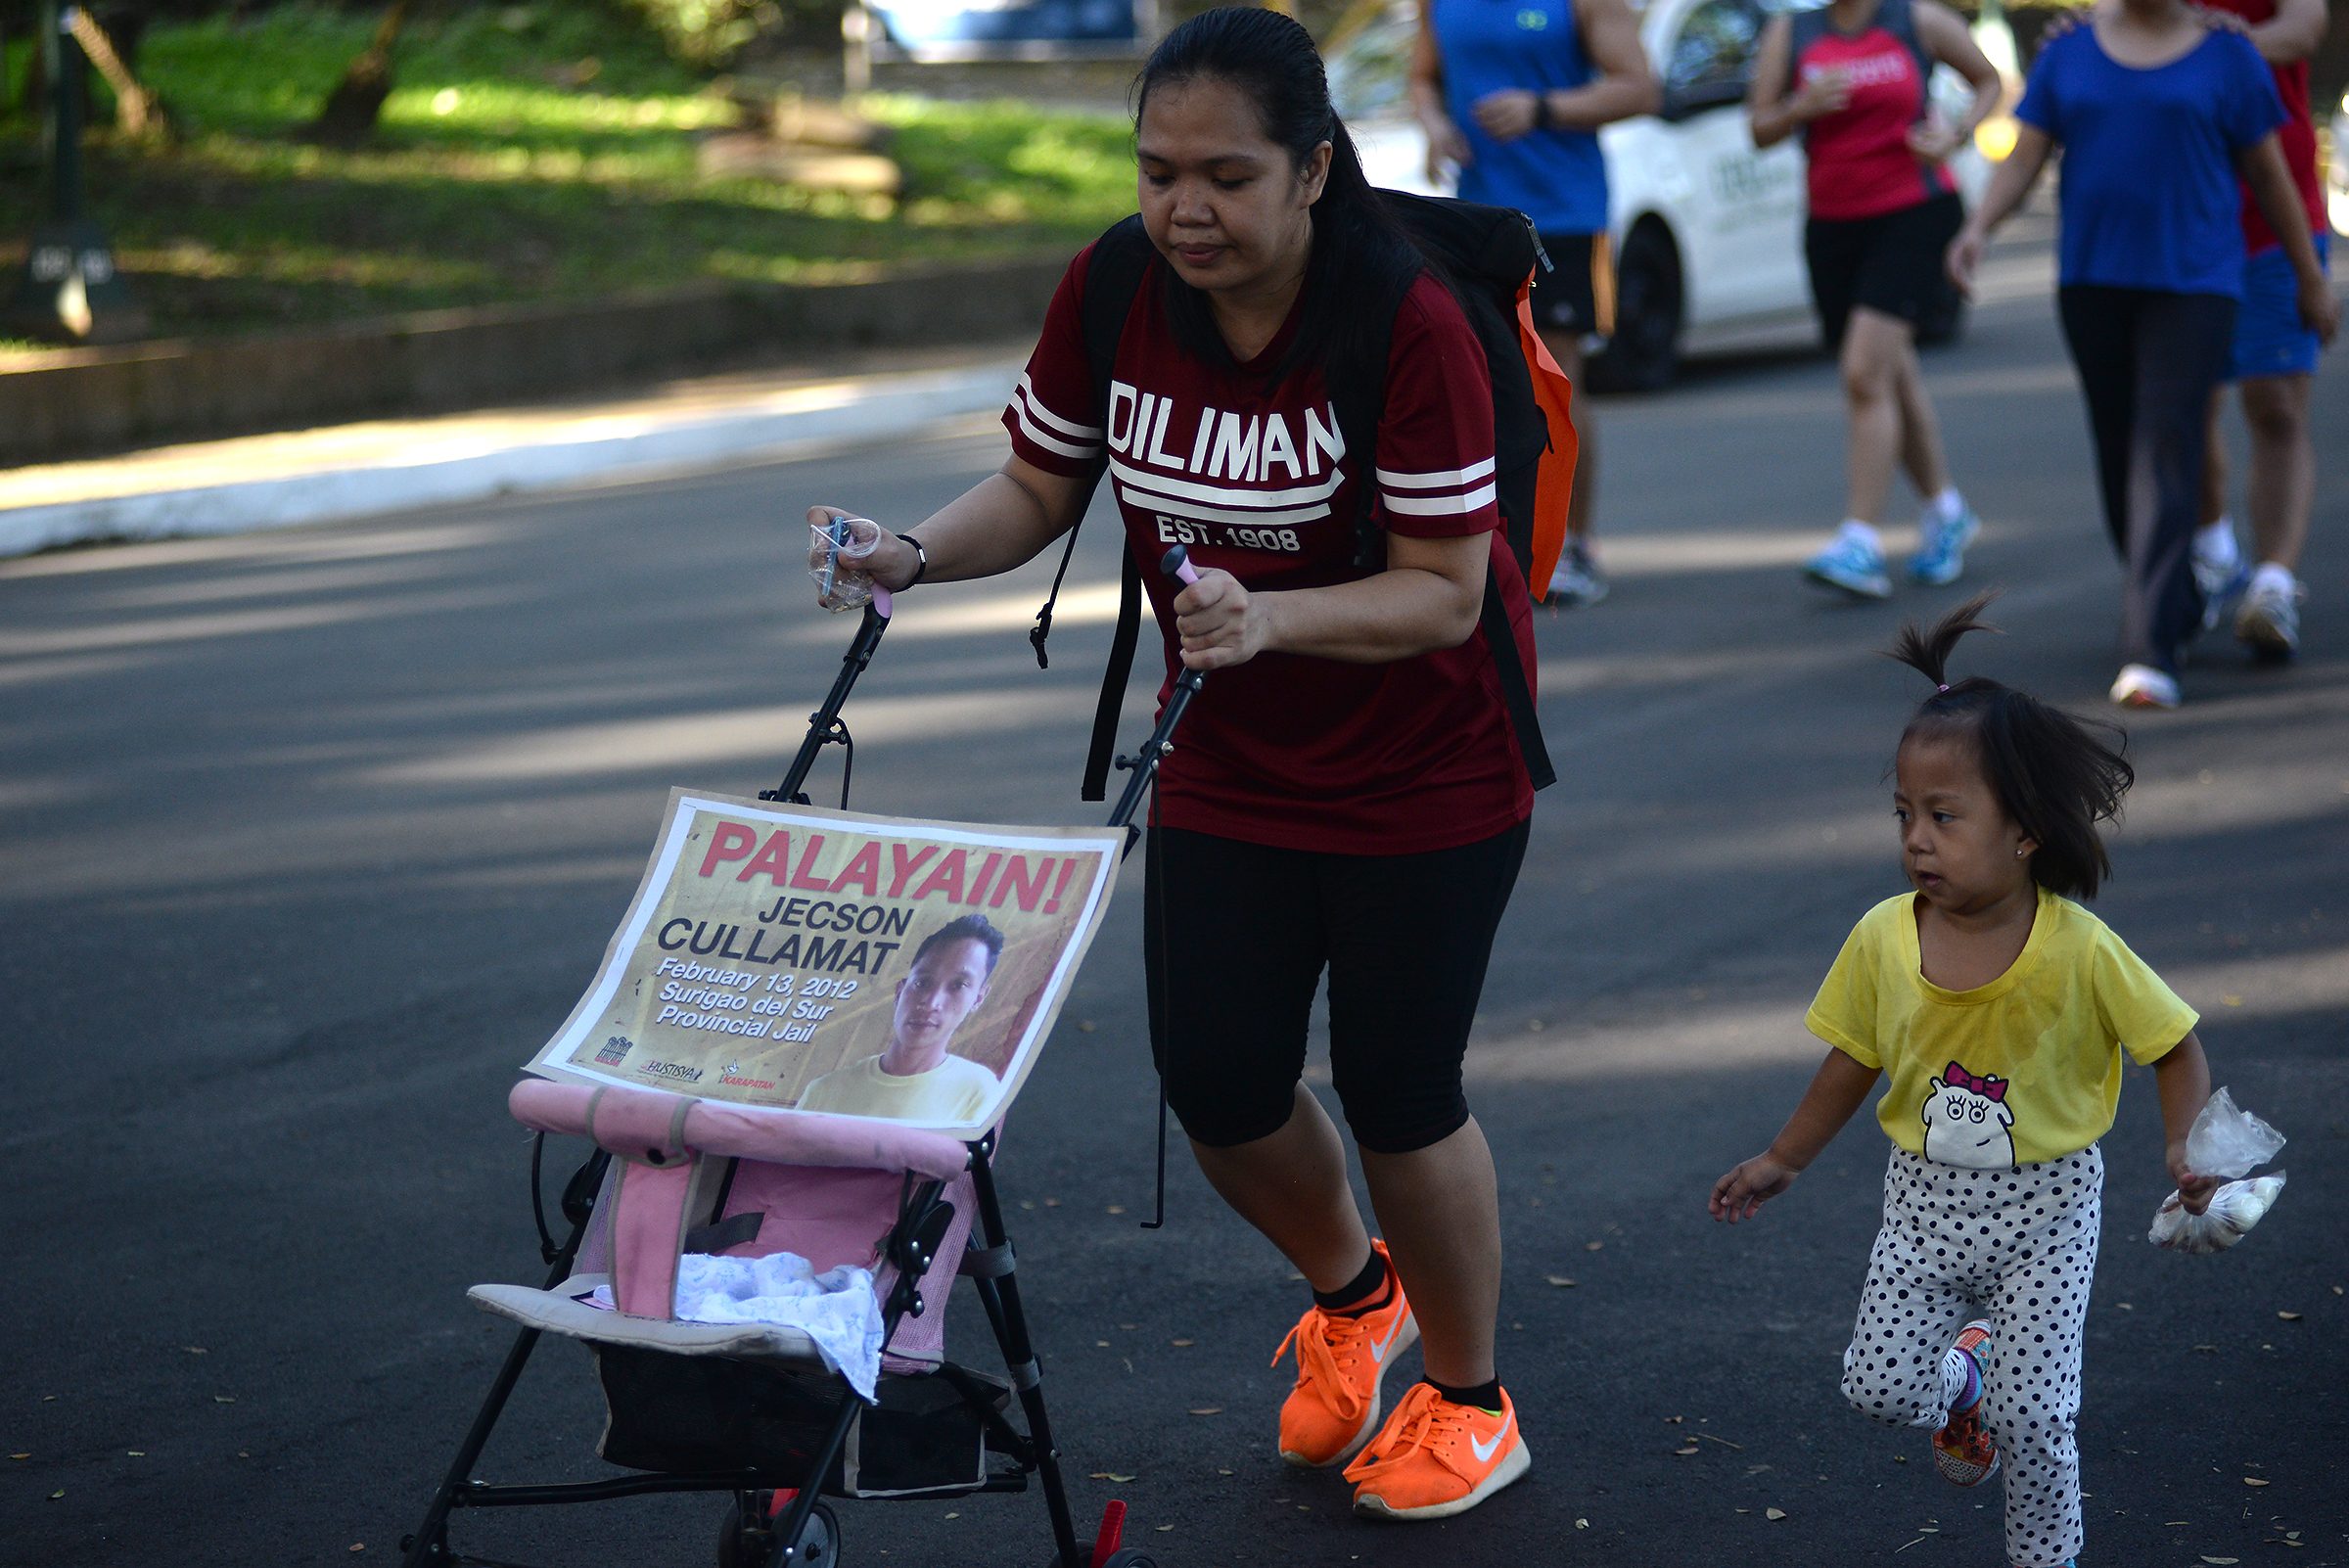 IN PHOTOS: Relatives of political prisoners run for freedom